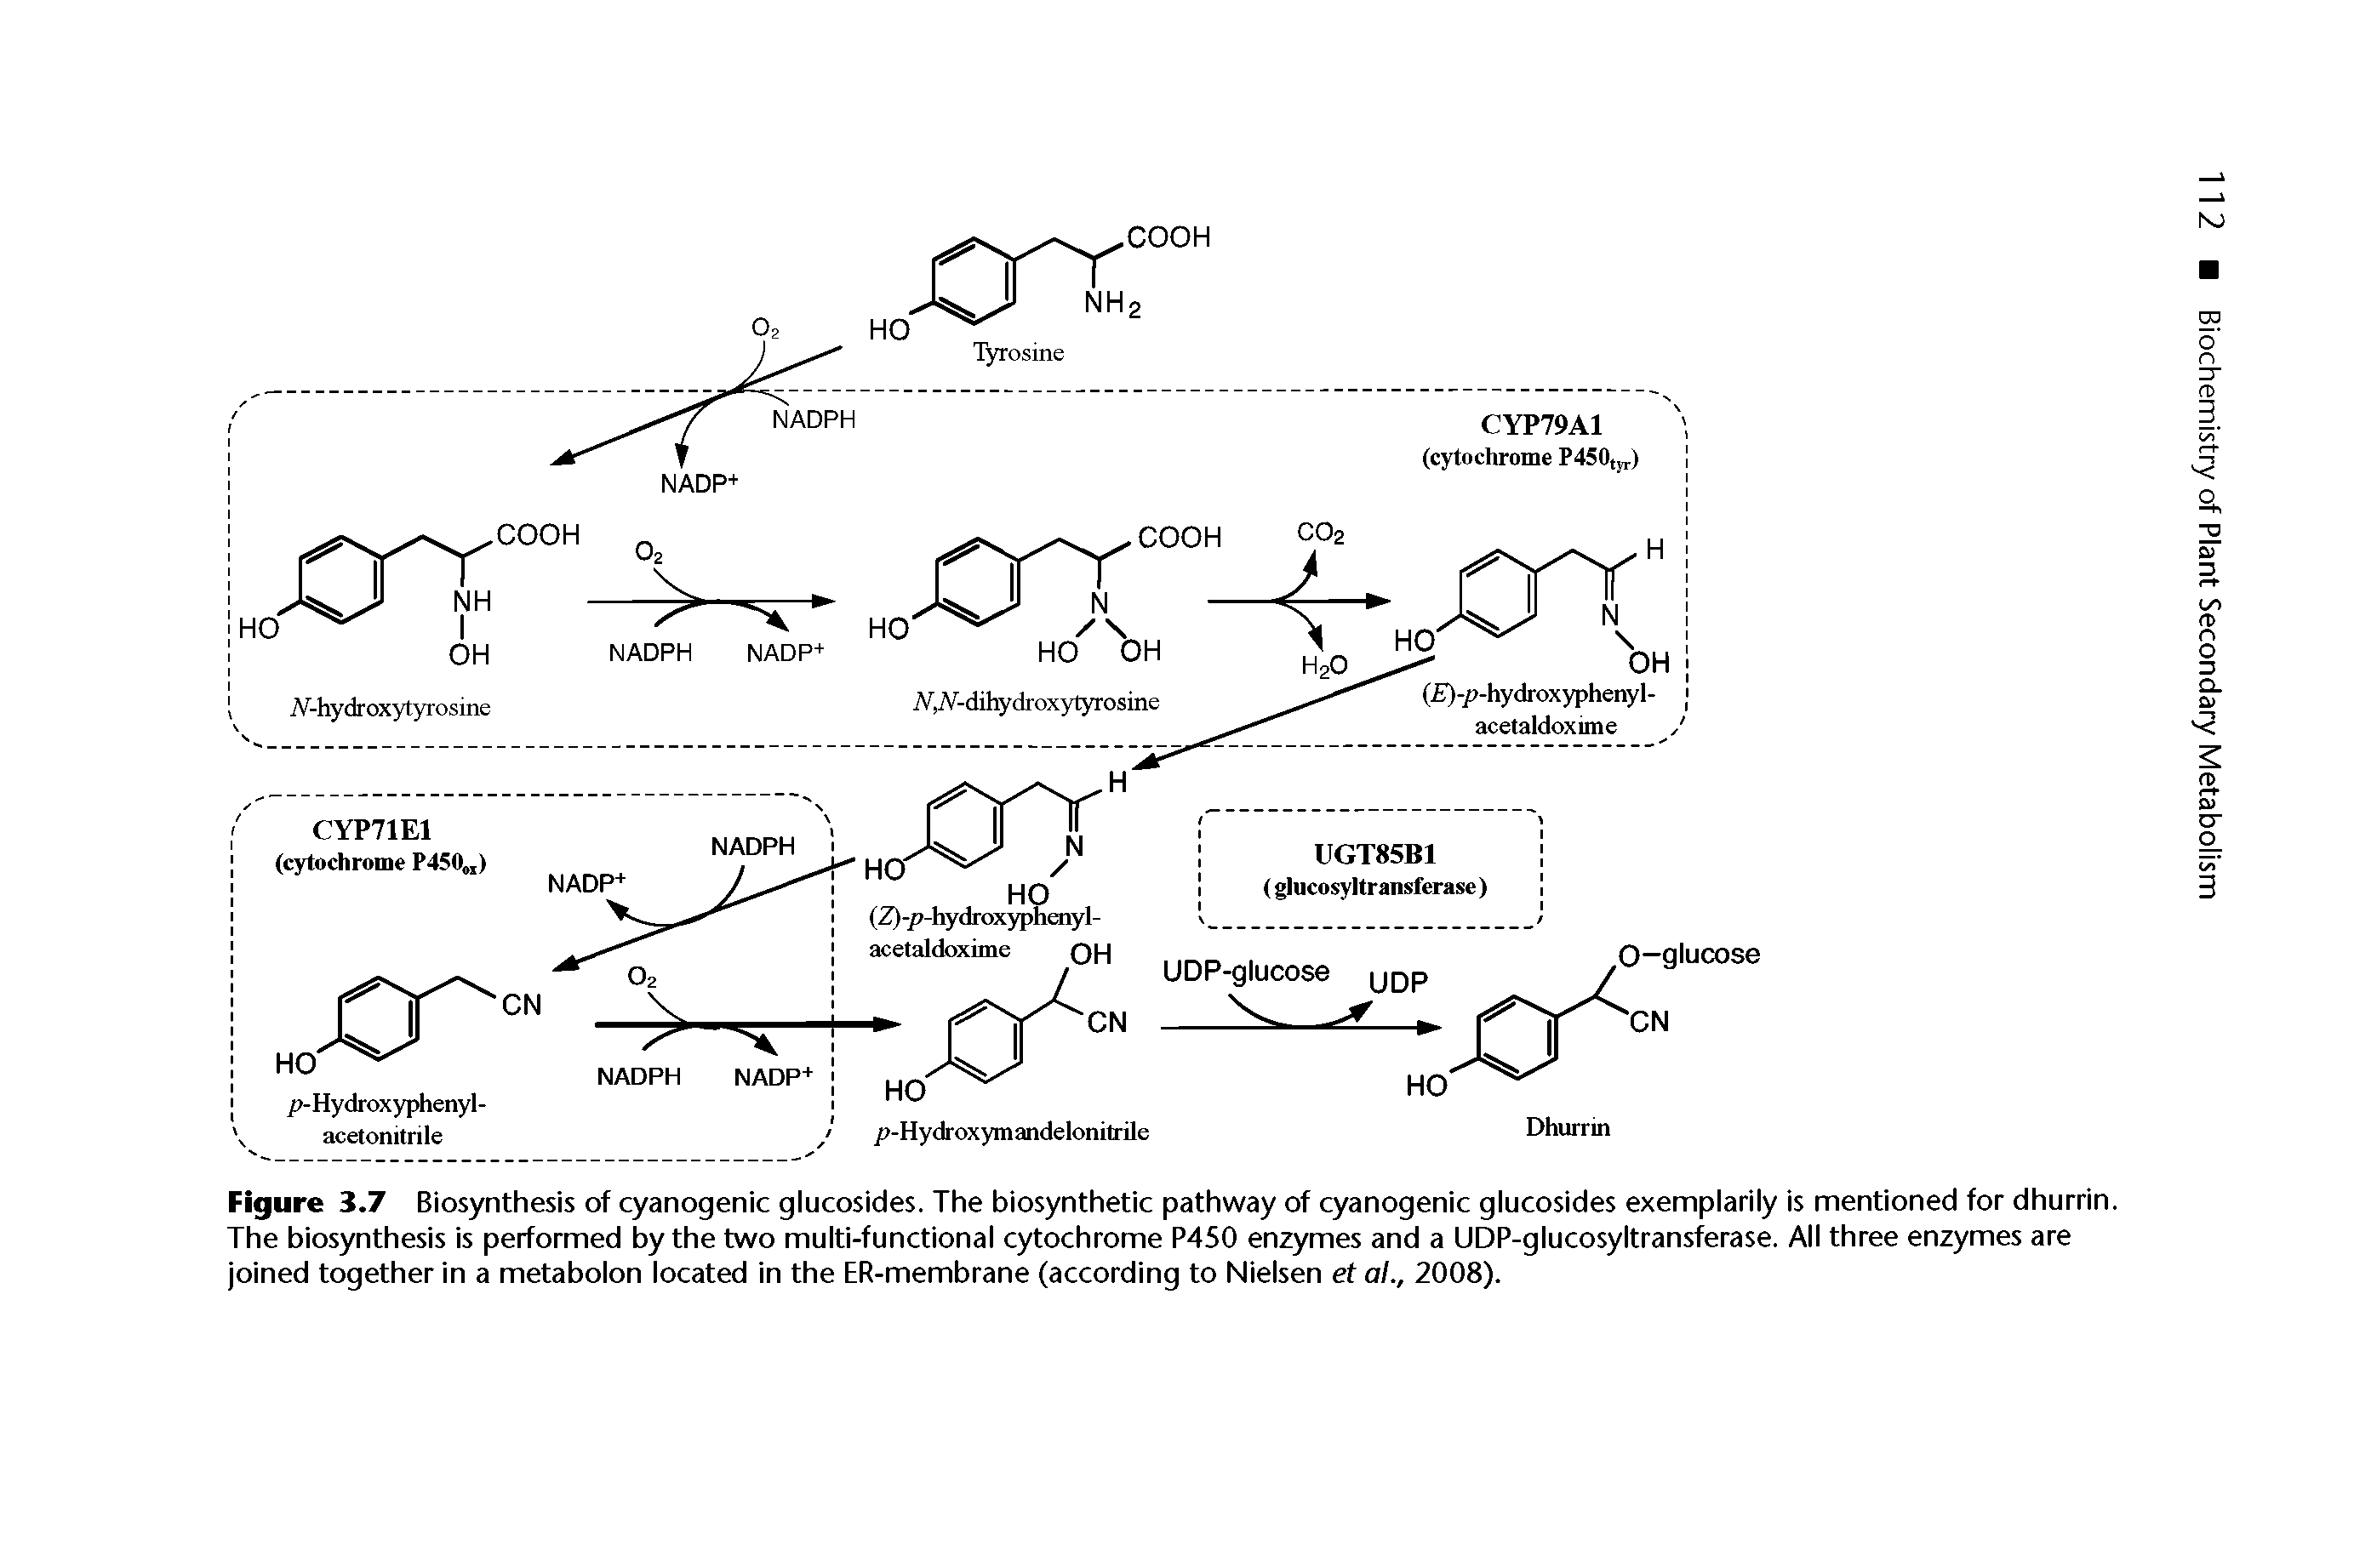 Figure 3.7 Biosynthesis of cyanogenic glucosides. The biosynthetic pathway of cyanogenic glucosides exemplarily is mentioned for dhurrin. The biosynthesis is performed by the two multi-functional cytochrome P450 enzymes and a UDP-glucosyltransferase. All three enzymes are joined together in a metabolon located in the ER-membrane (according to Nielsen et al., 2008).